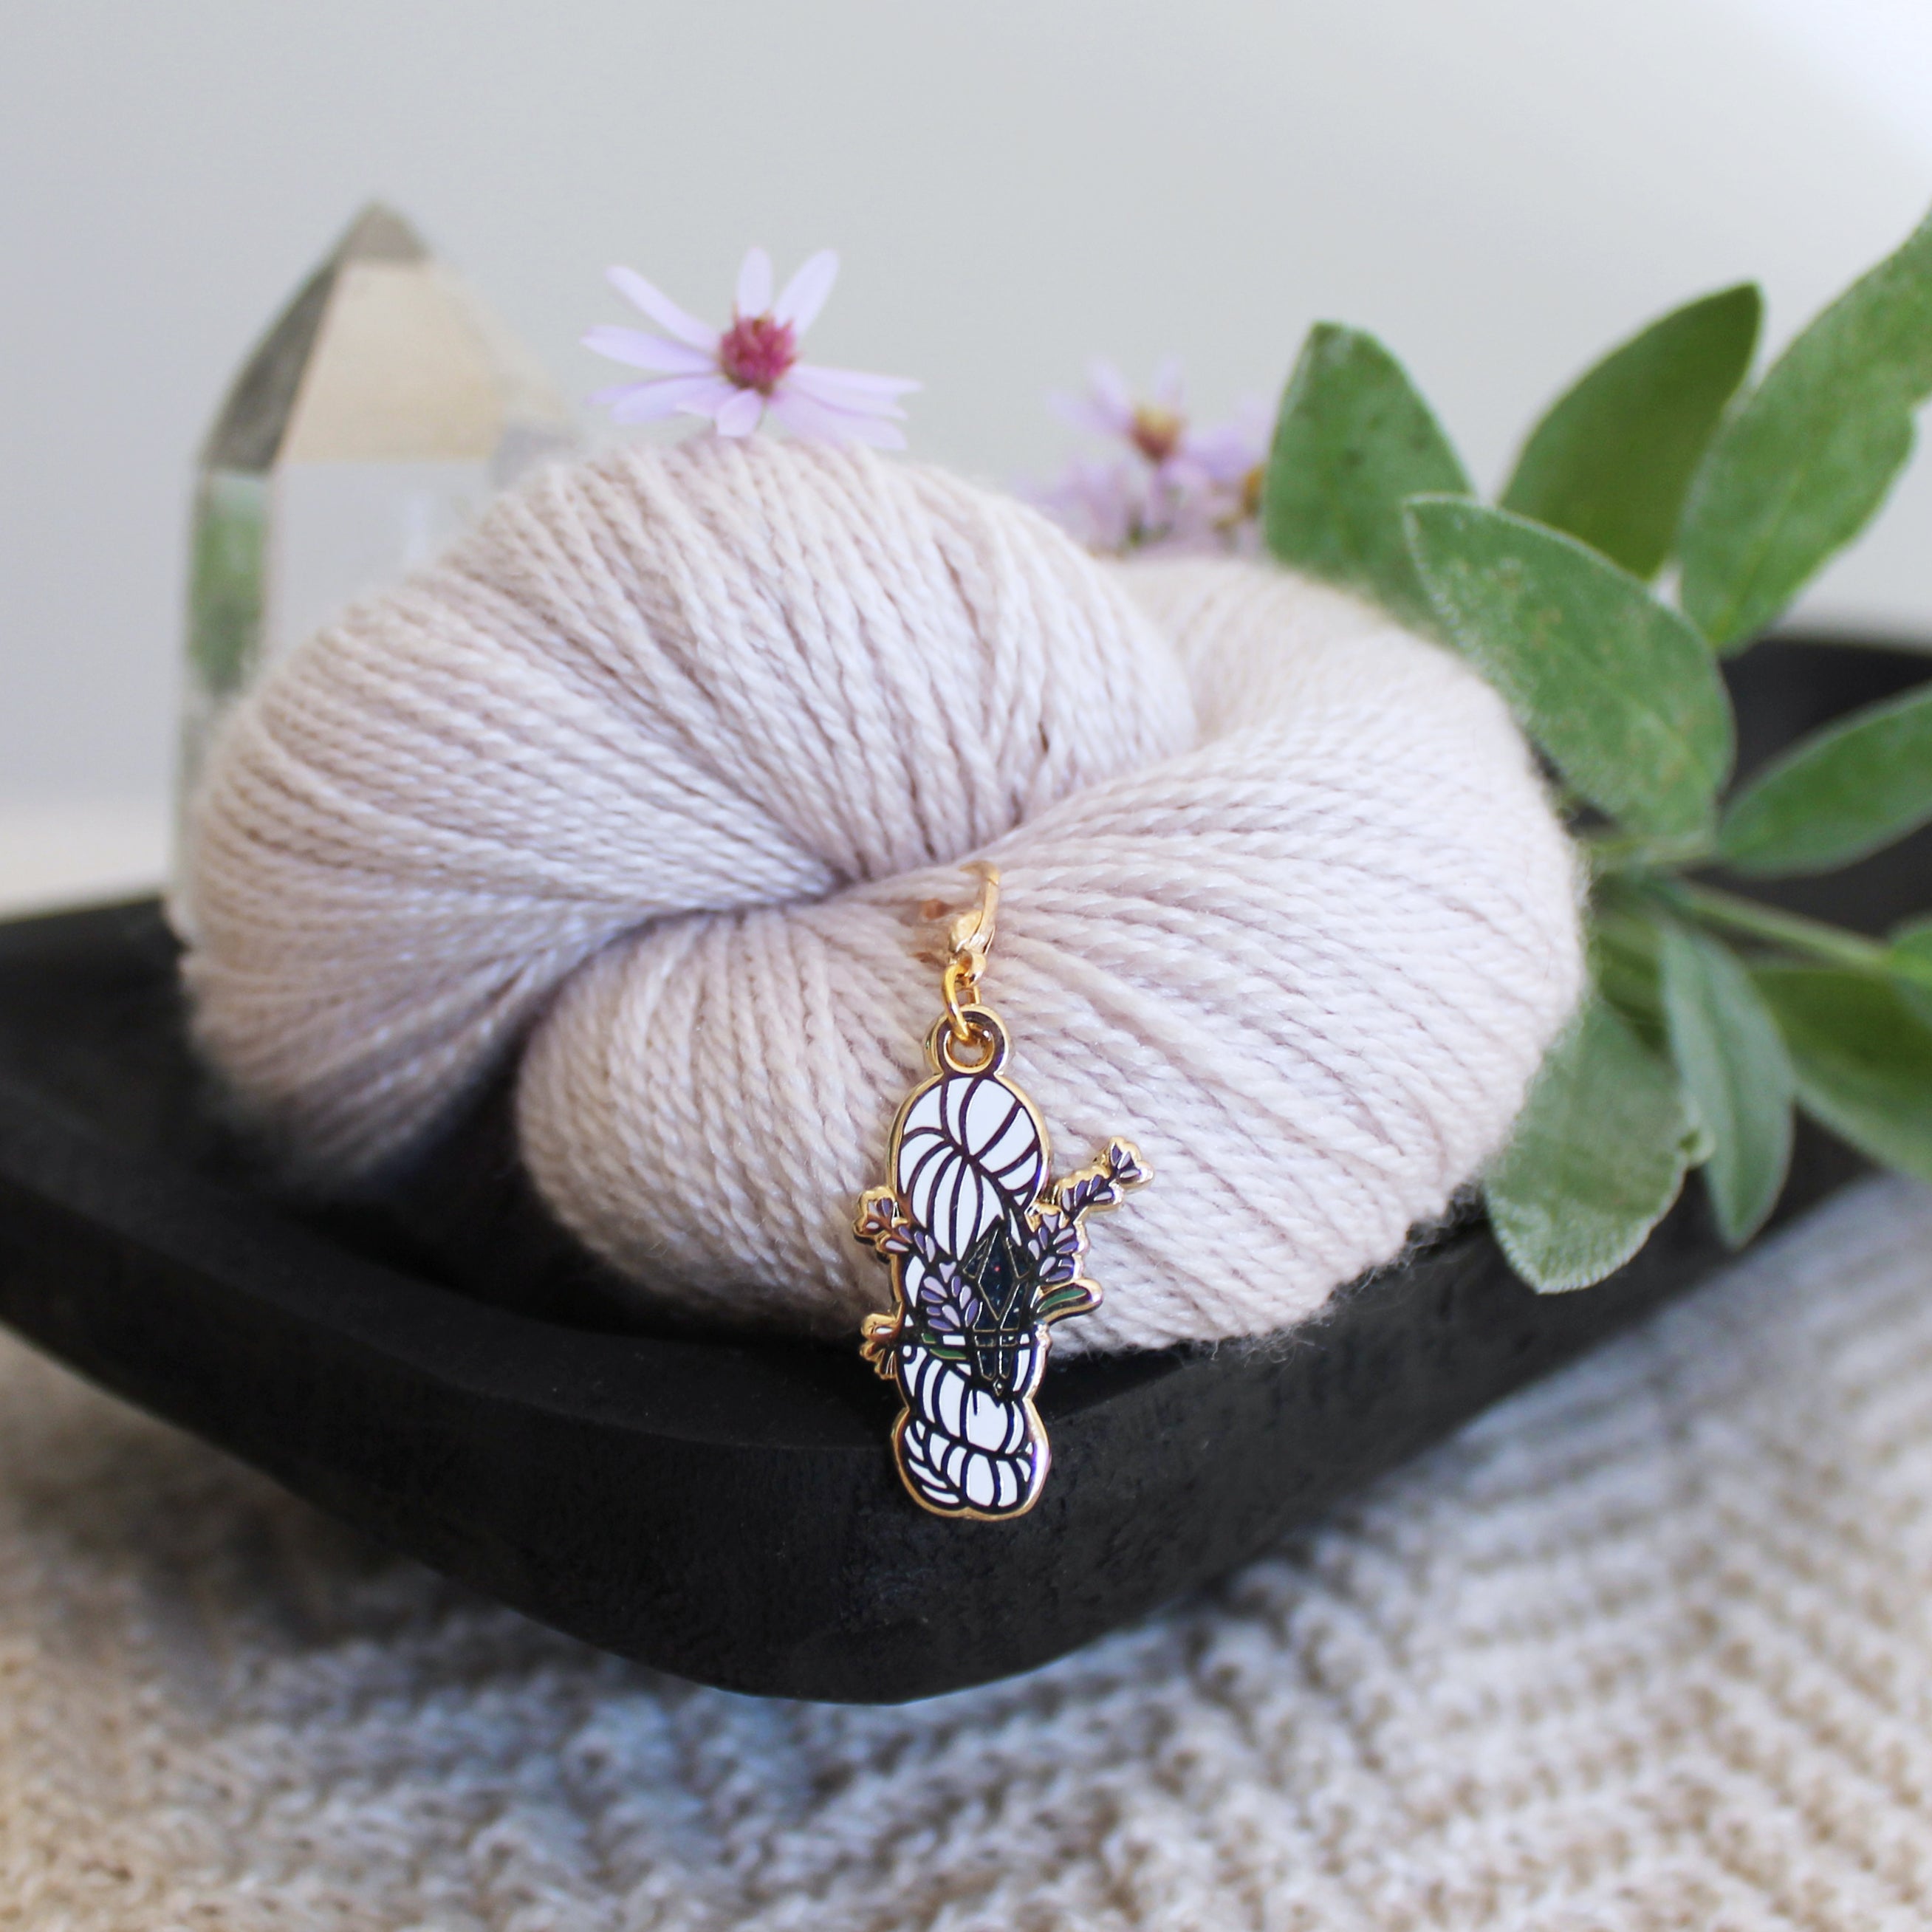 Witchy Crystal Keeper / Stitch Marker